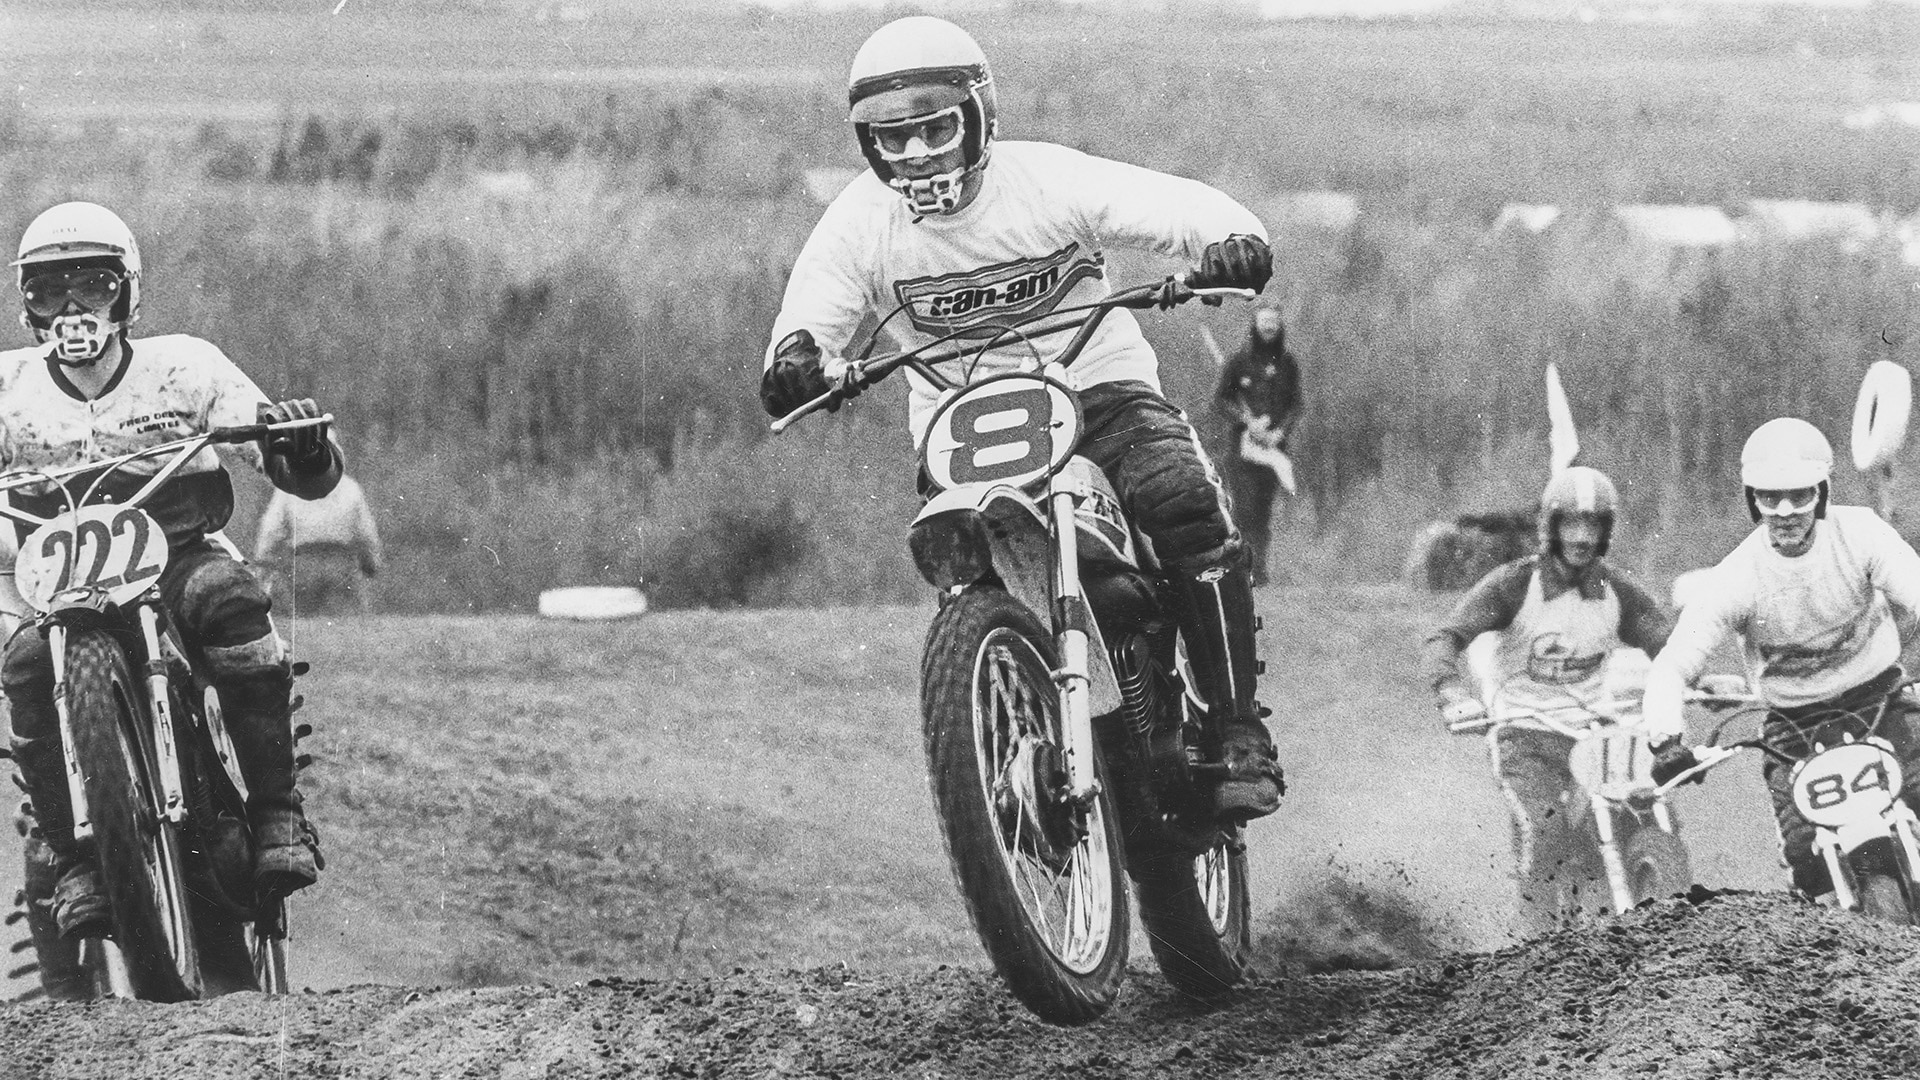 Can-Am racers competing on motorcycles